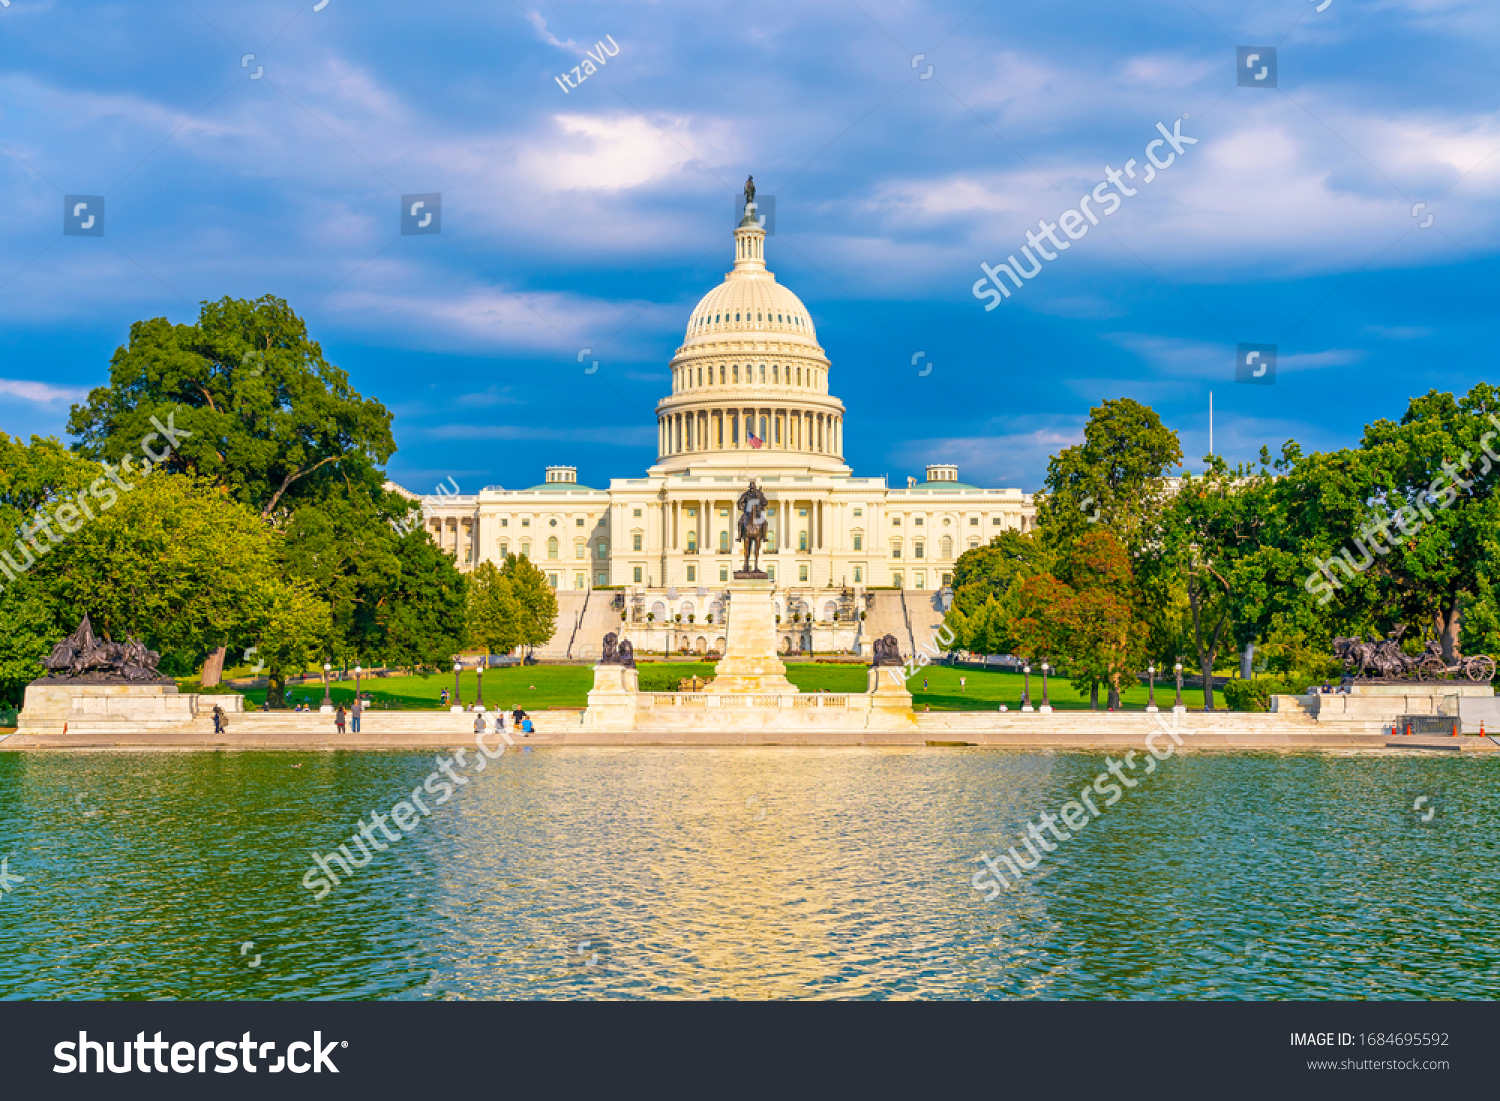 The United States Capitol, often called the Capitol Building, is the home of the United States Congress and the seat of the legislative branch of the U.S. federal government. Washington, United States #1684695592